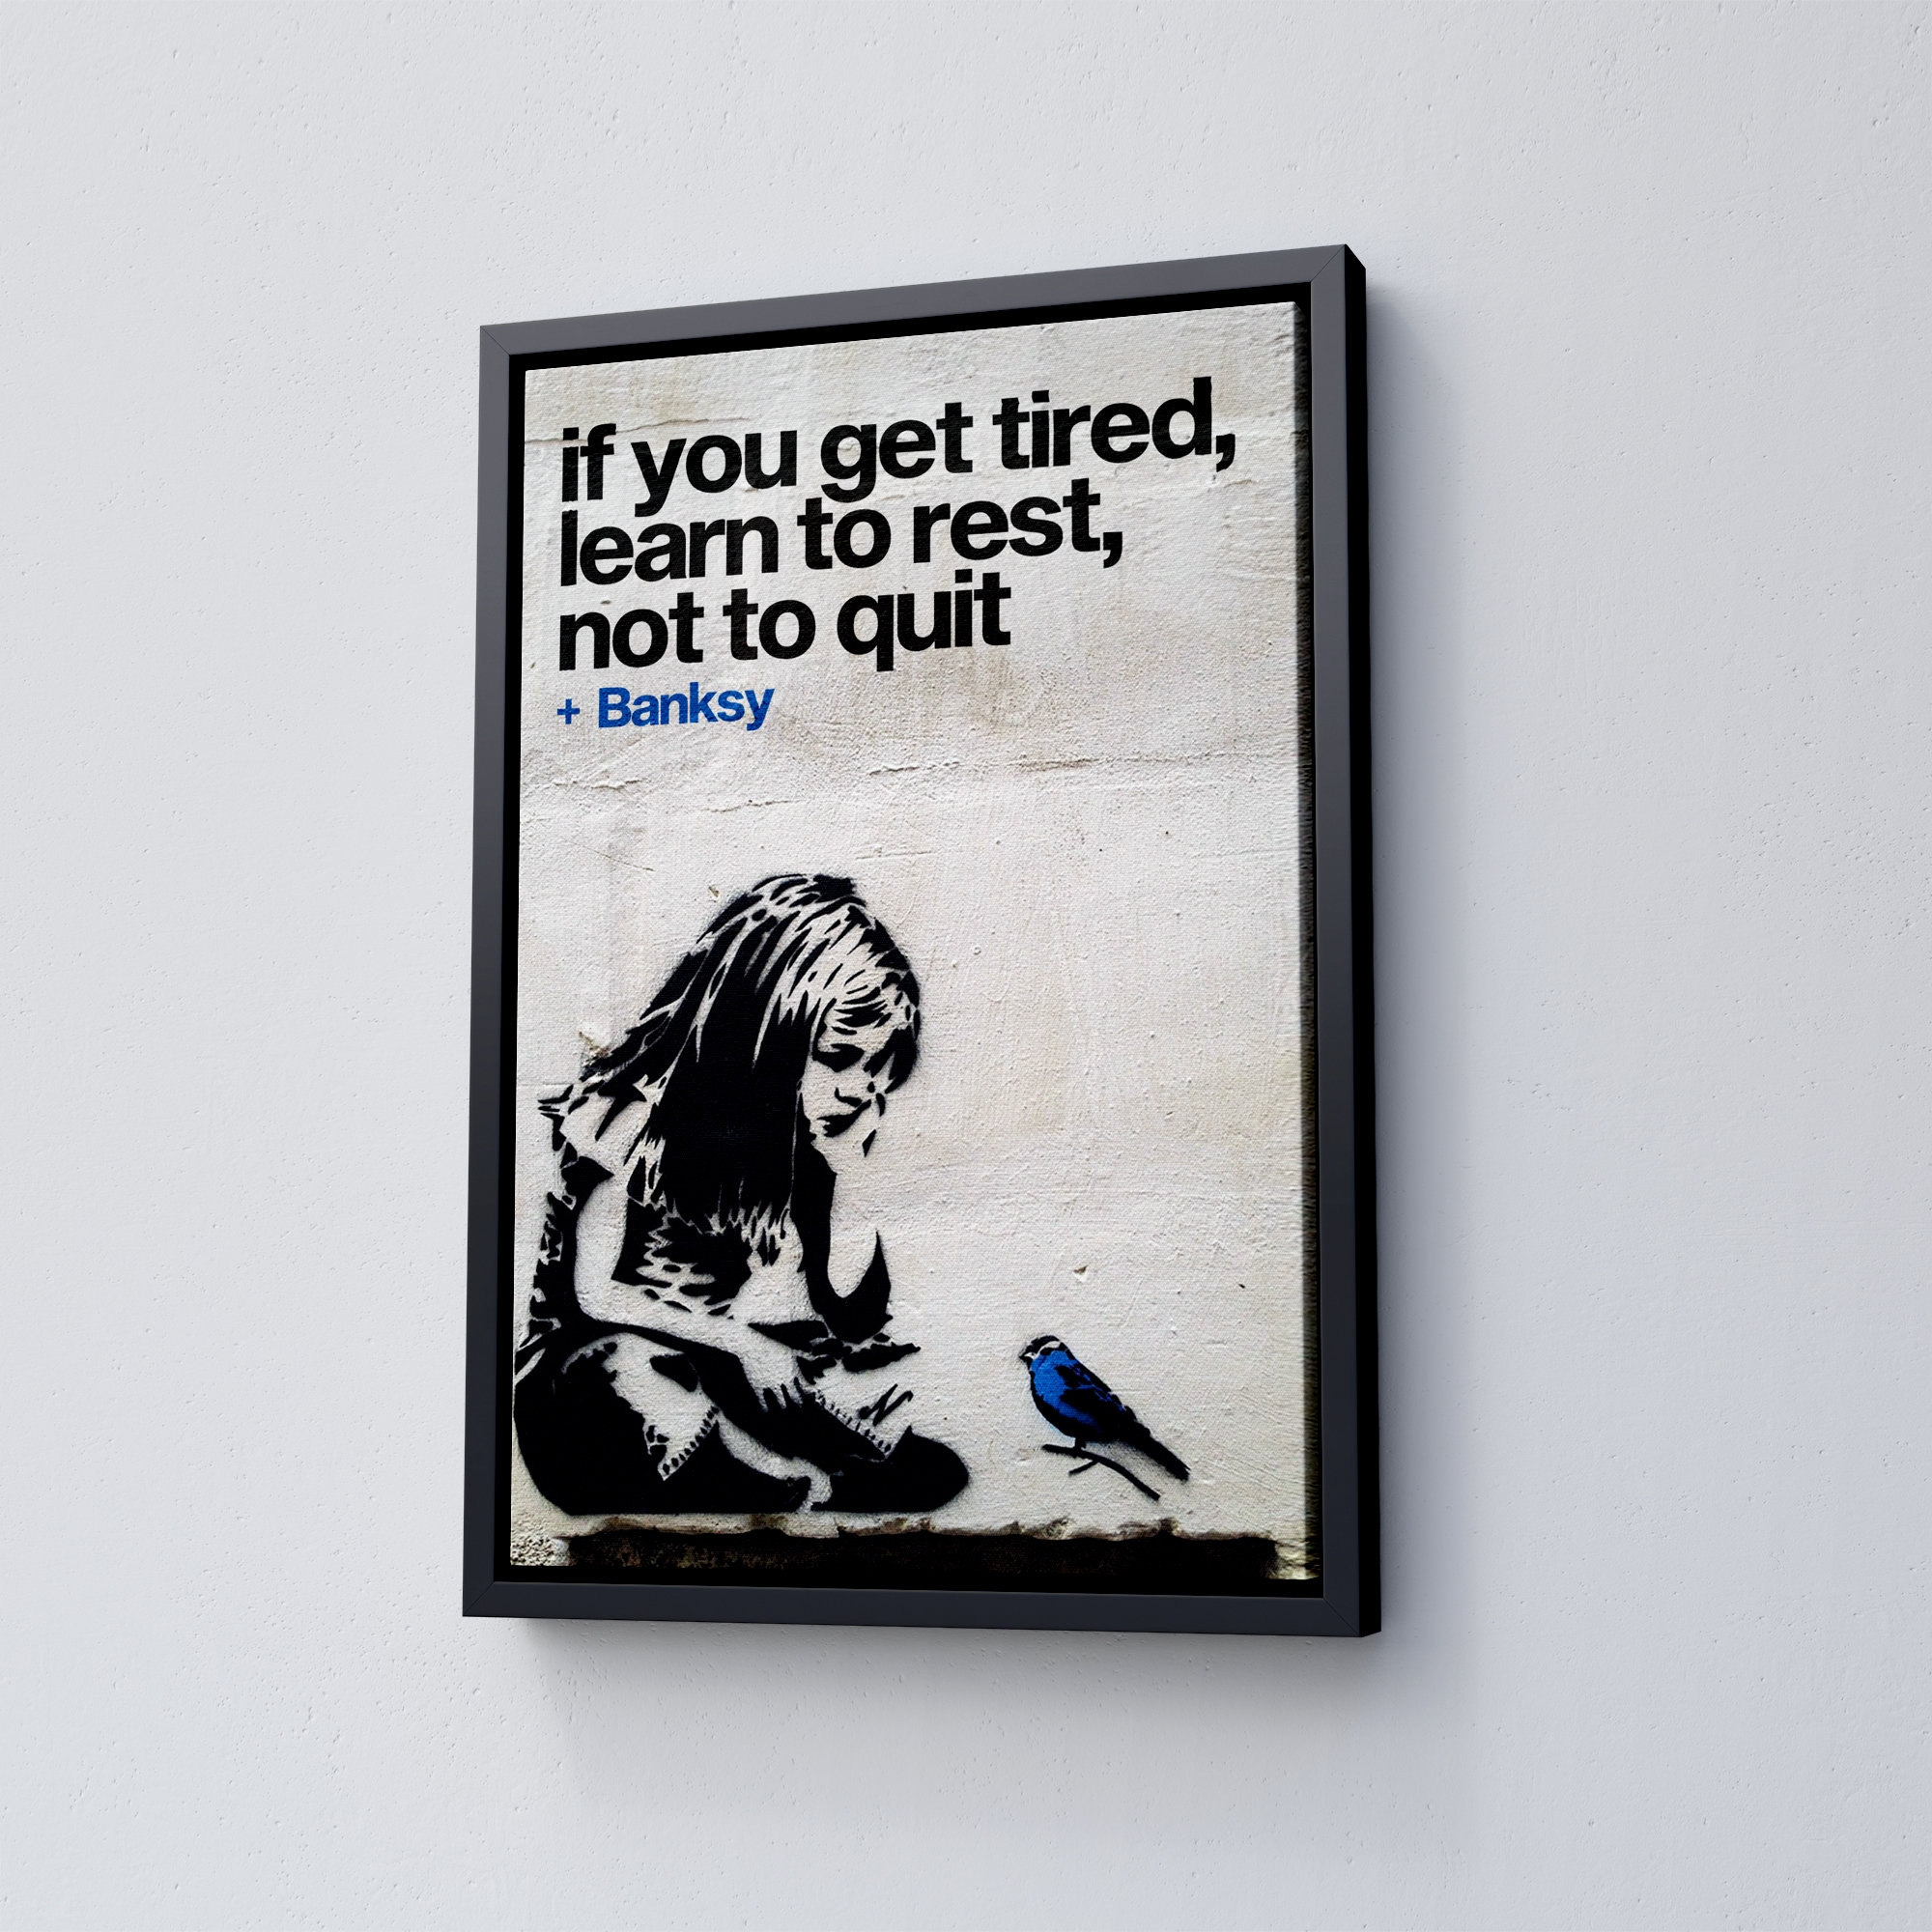 Wandtattoo Banksy - If you get tired - Rund 